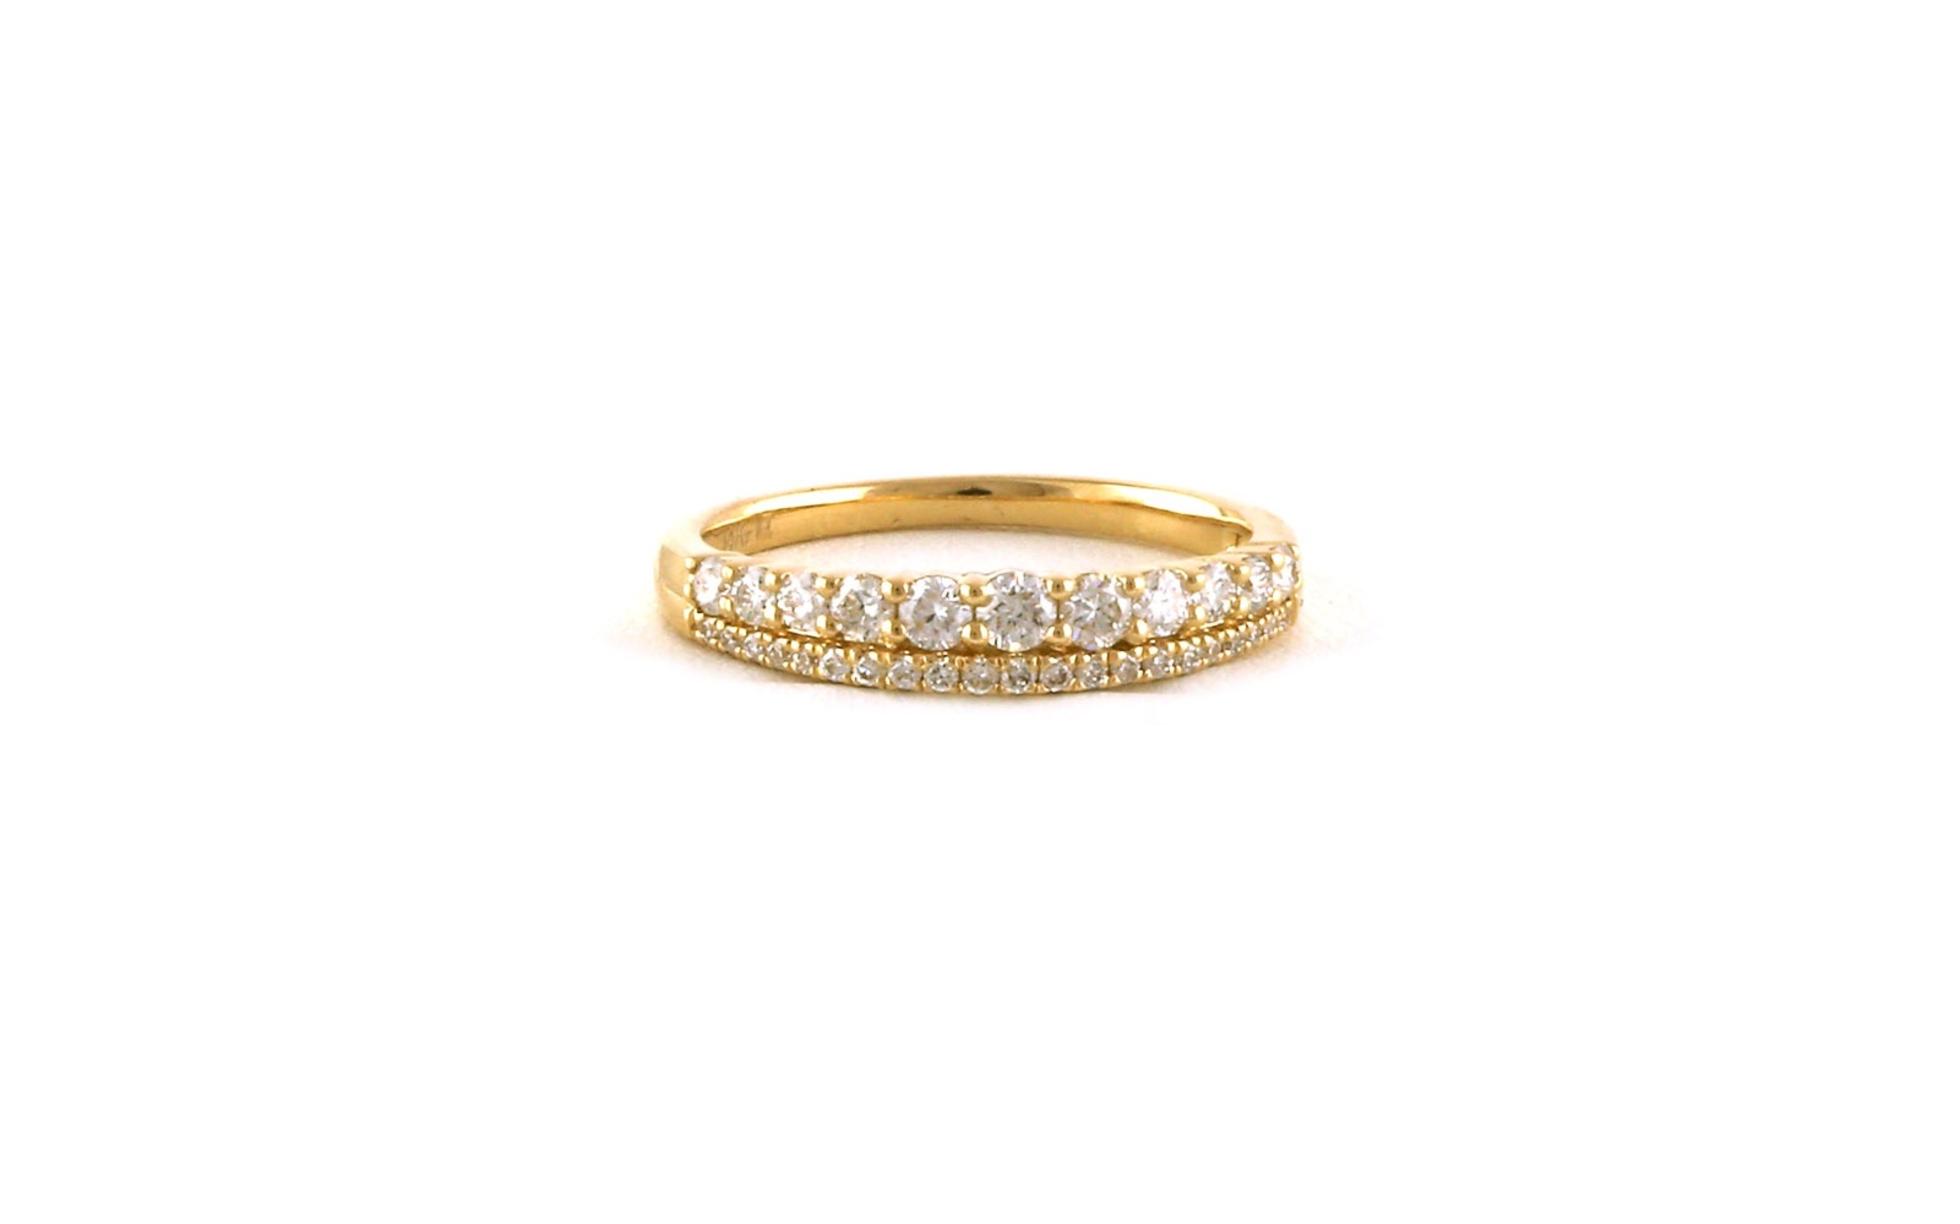 2-Row Graduated Pave Diamond Wedding Band in Yellow Gold (0.53cts TWT)